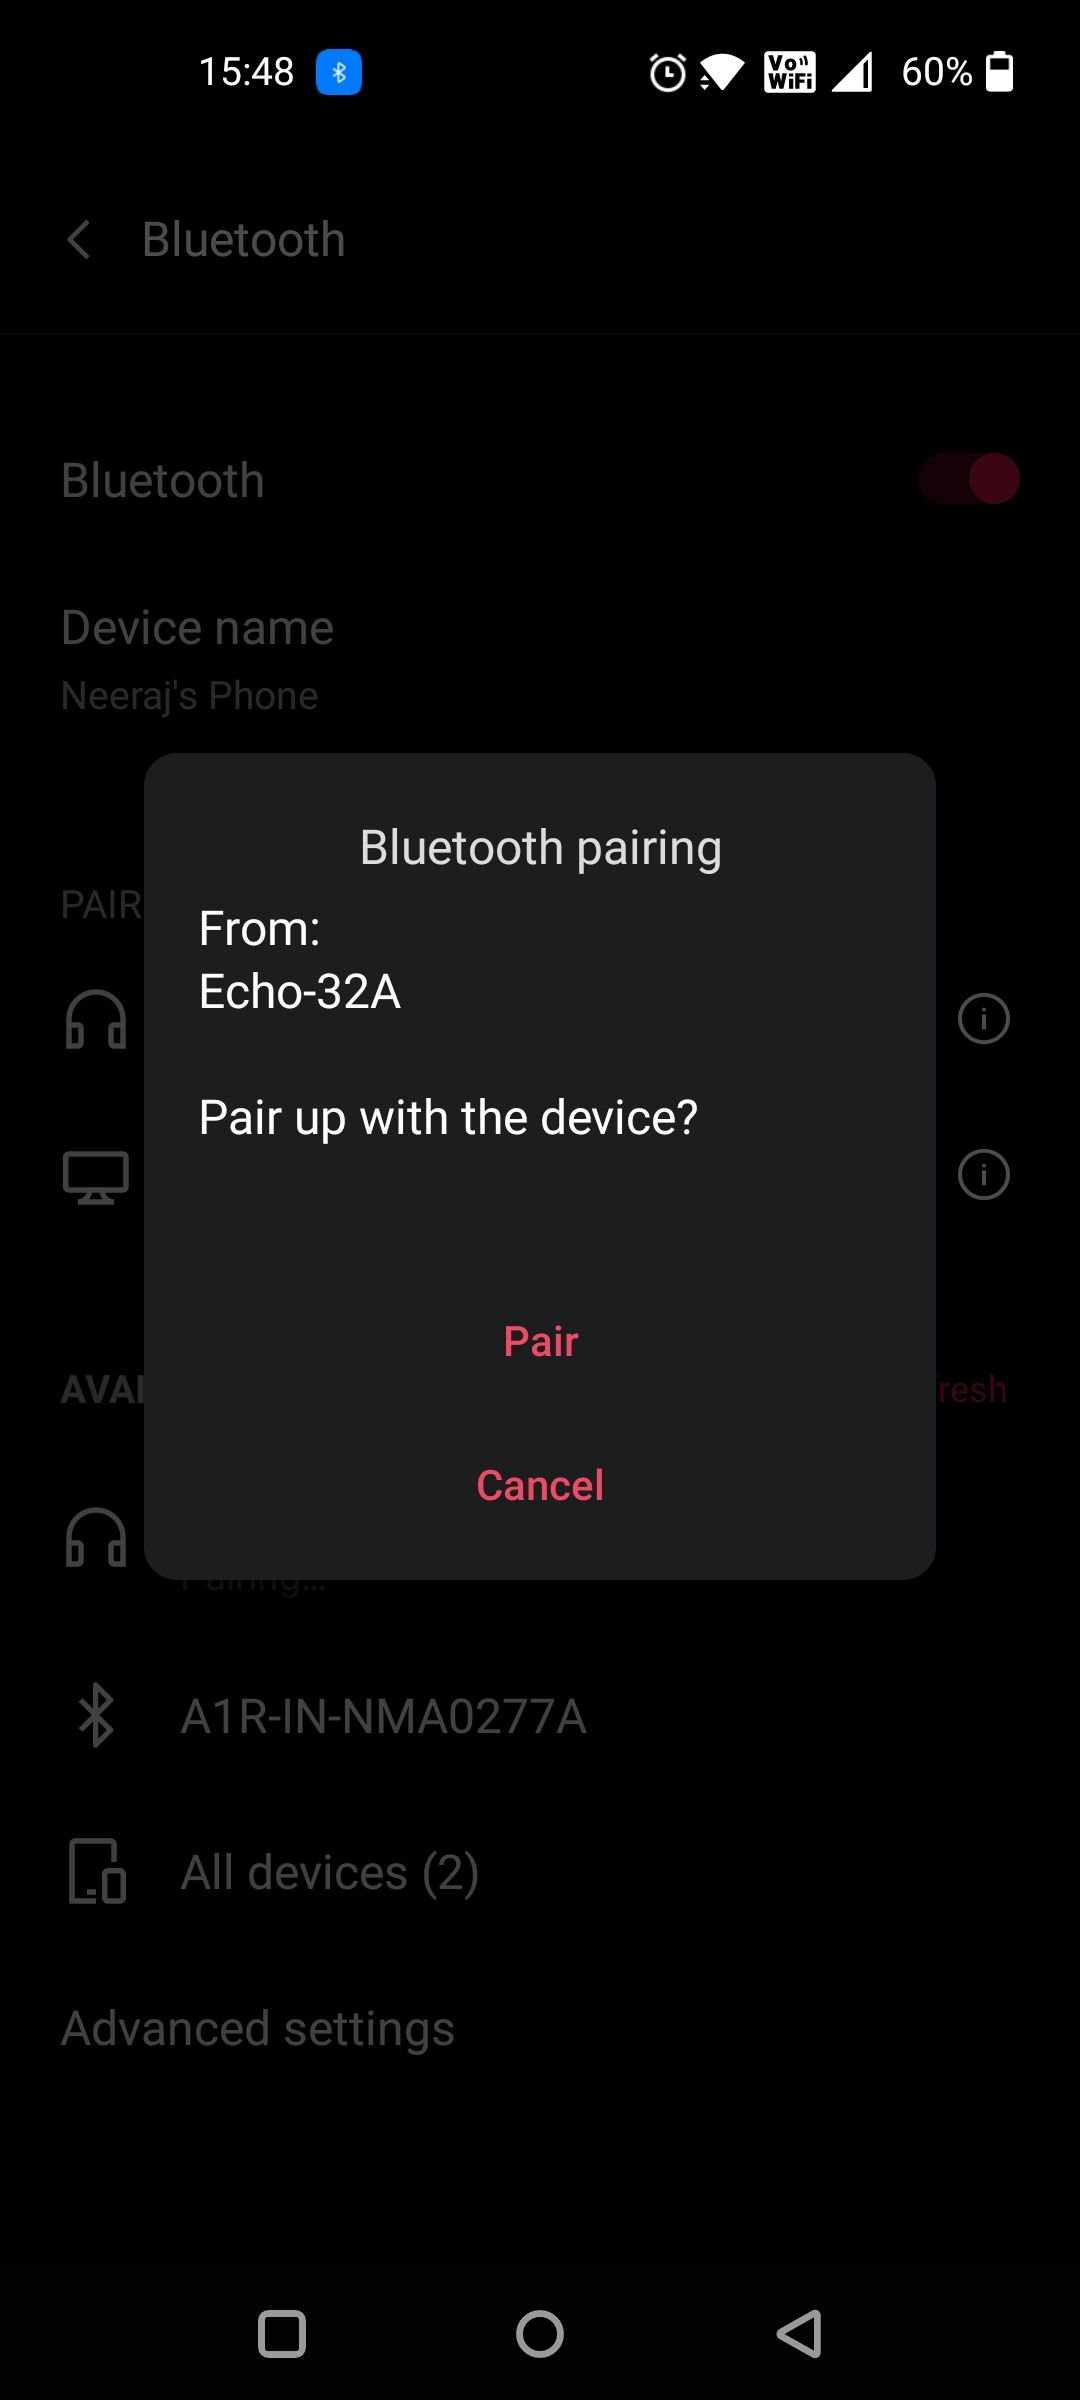 2.Notification on Phone to Pair to Your Echo Device